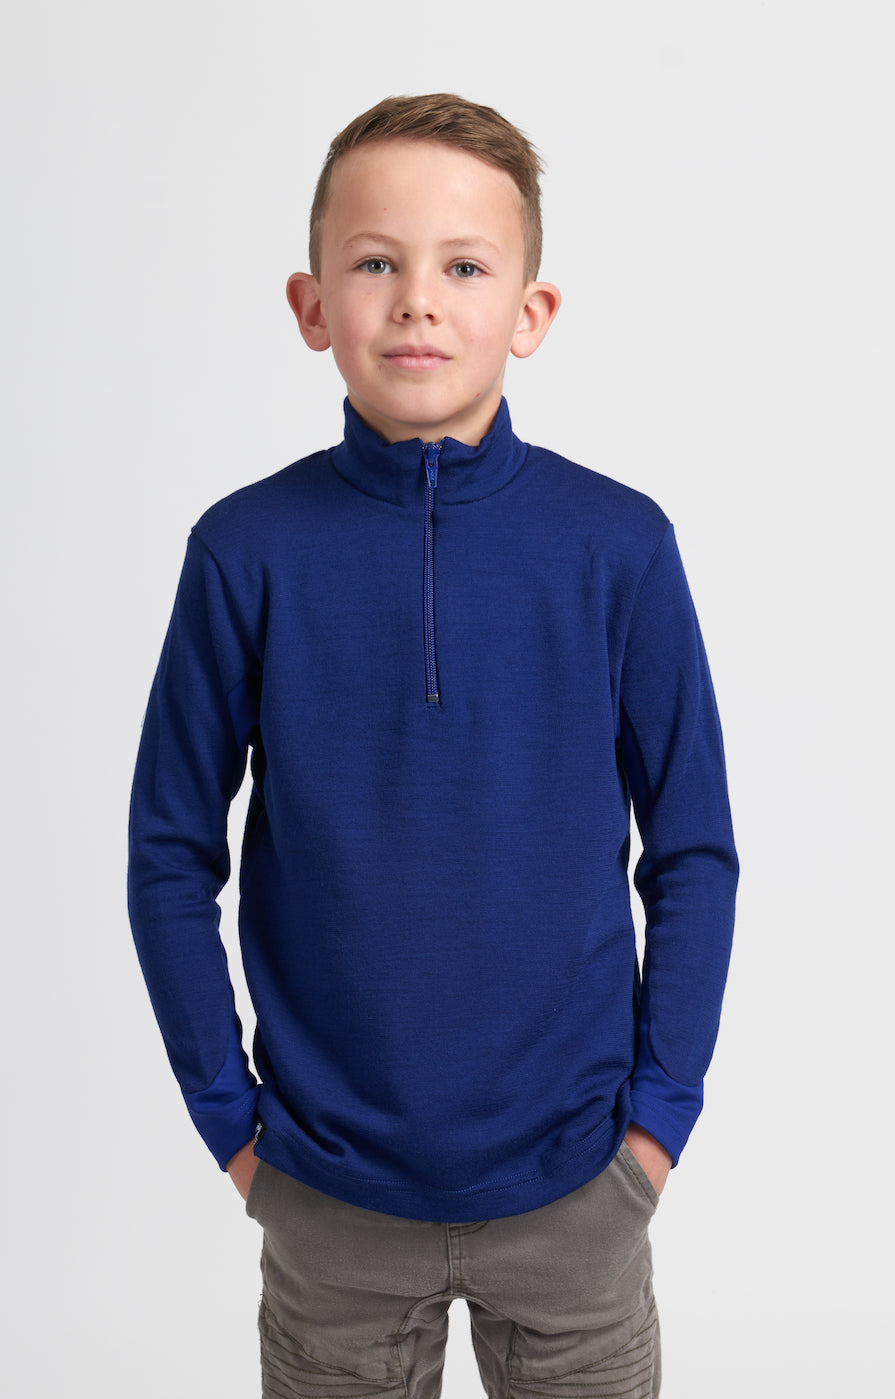 Kids Coast Quarter Zip - Recommended for School